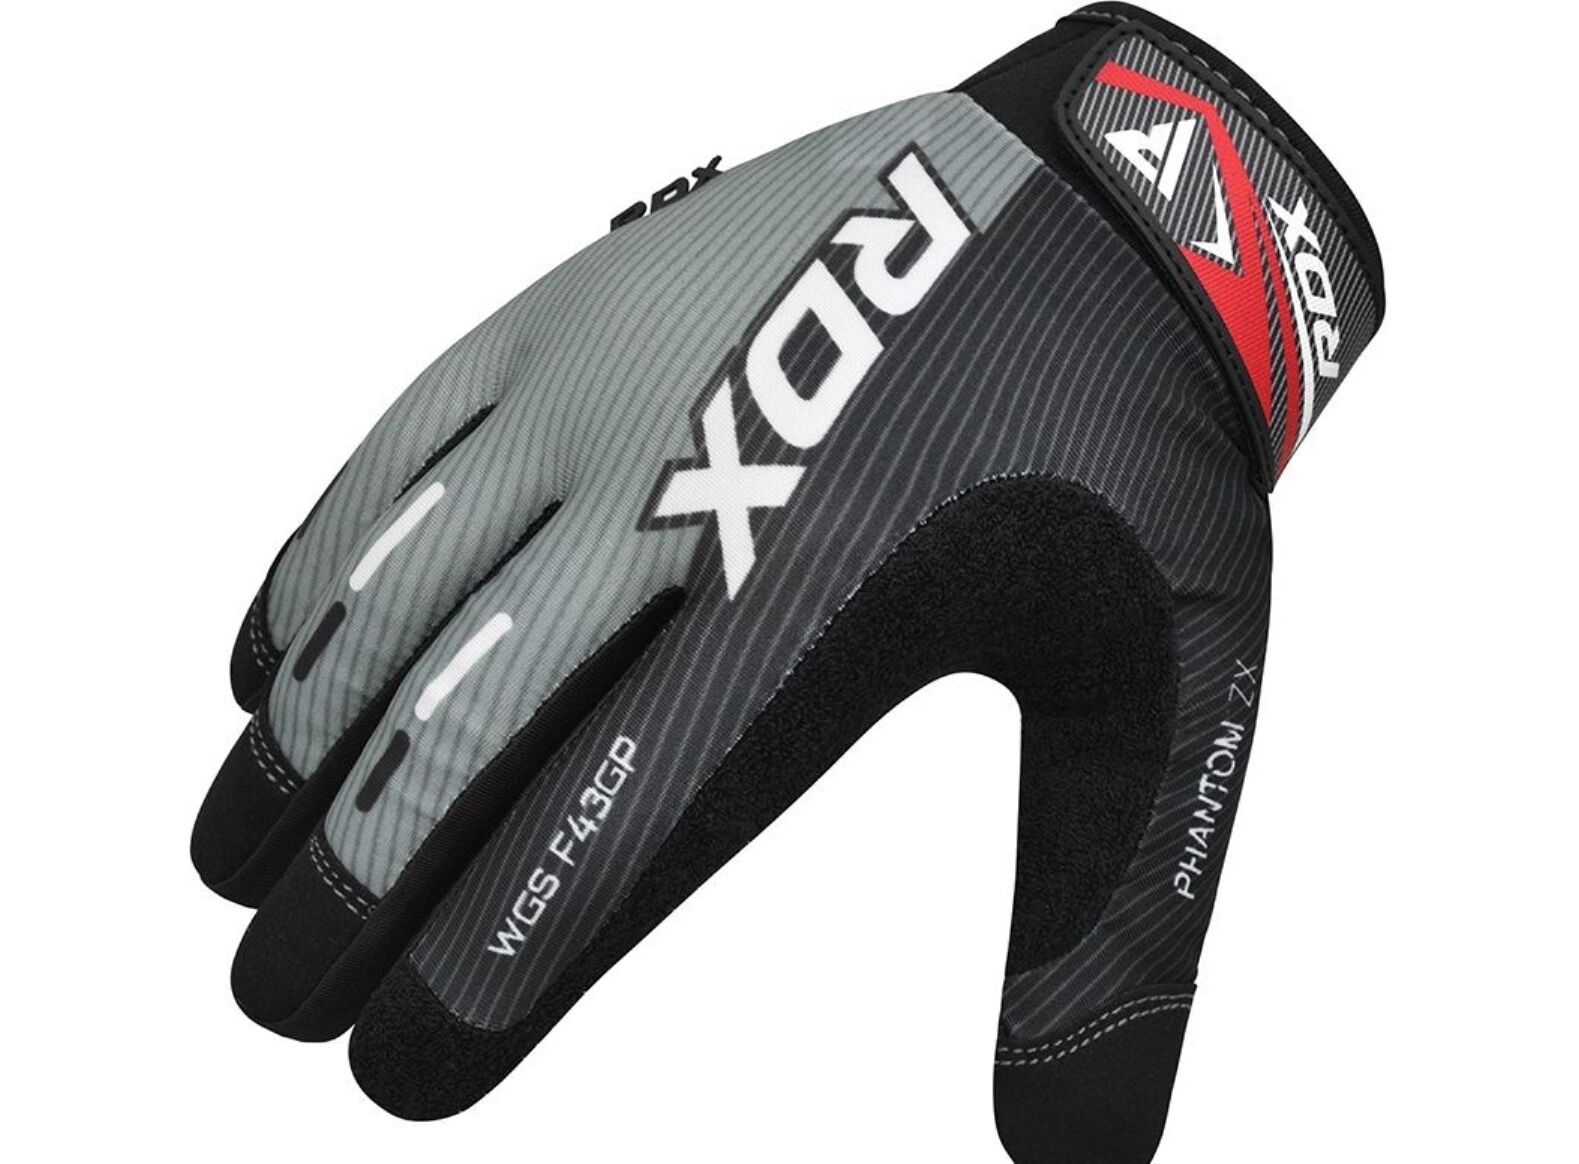  RDX Weight Lifting Full Finger Gym Gloves for Fitness